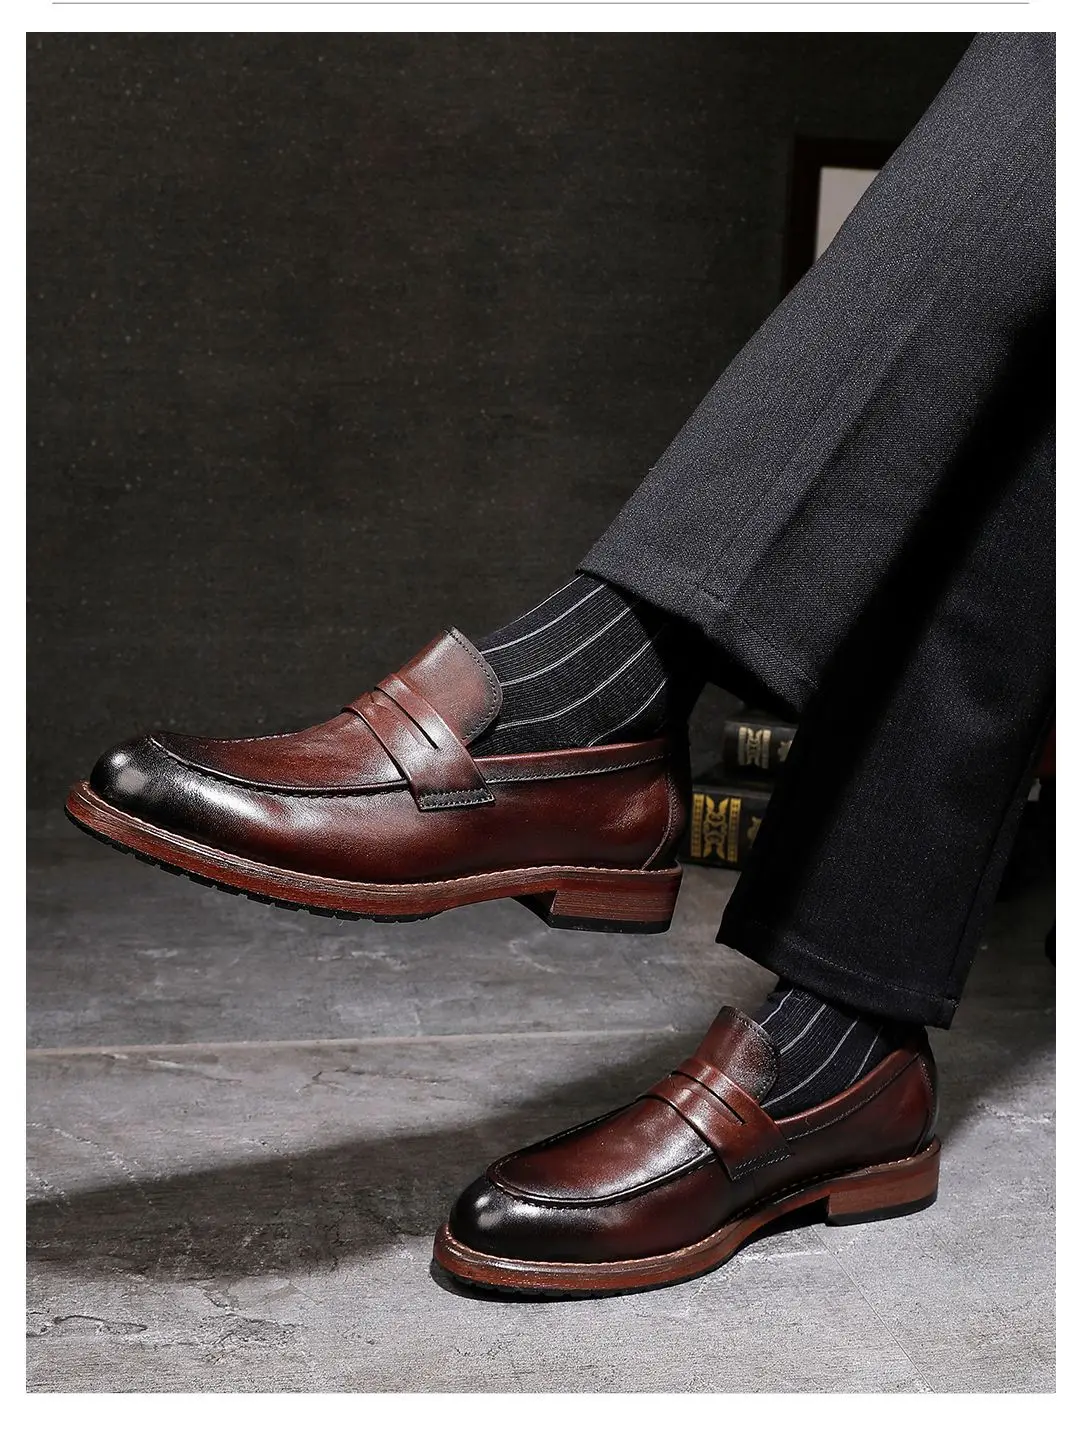 Classic Business Office Genuine Leather Formal Dress Penny Loafer Shoes ...